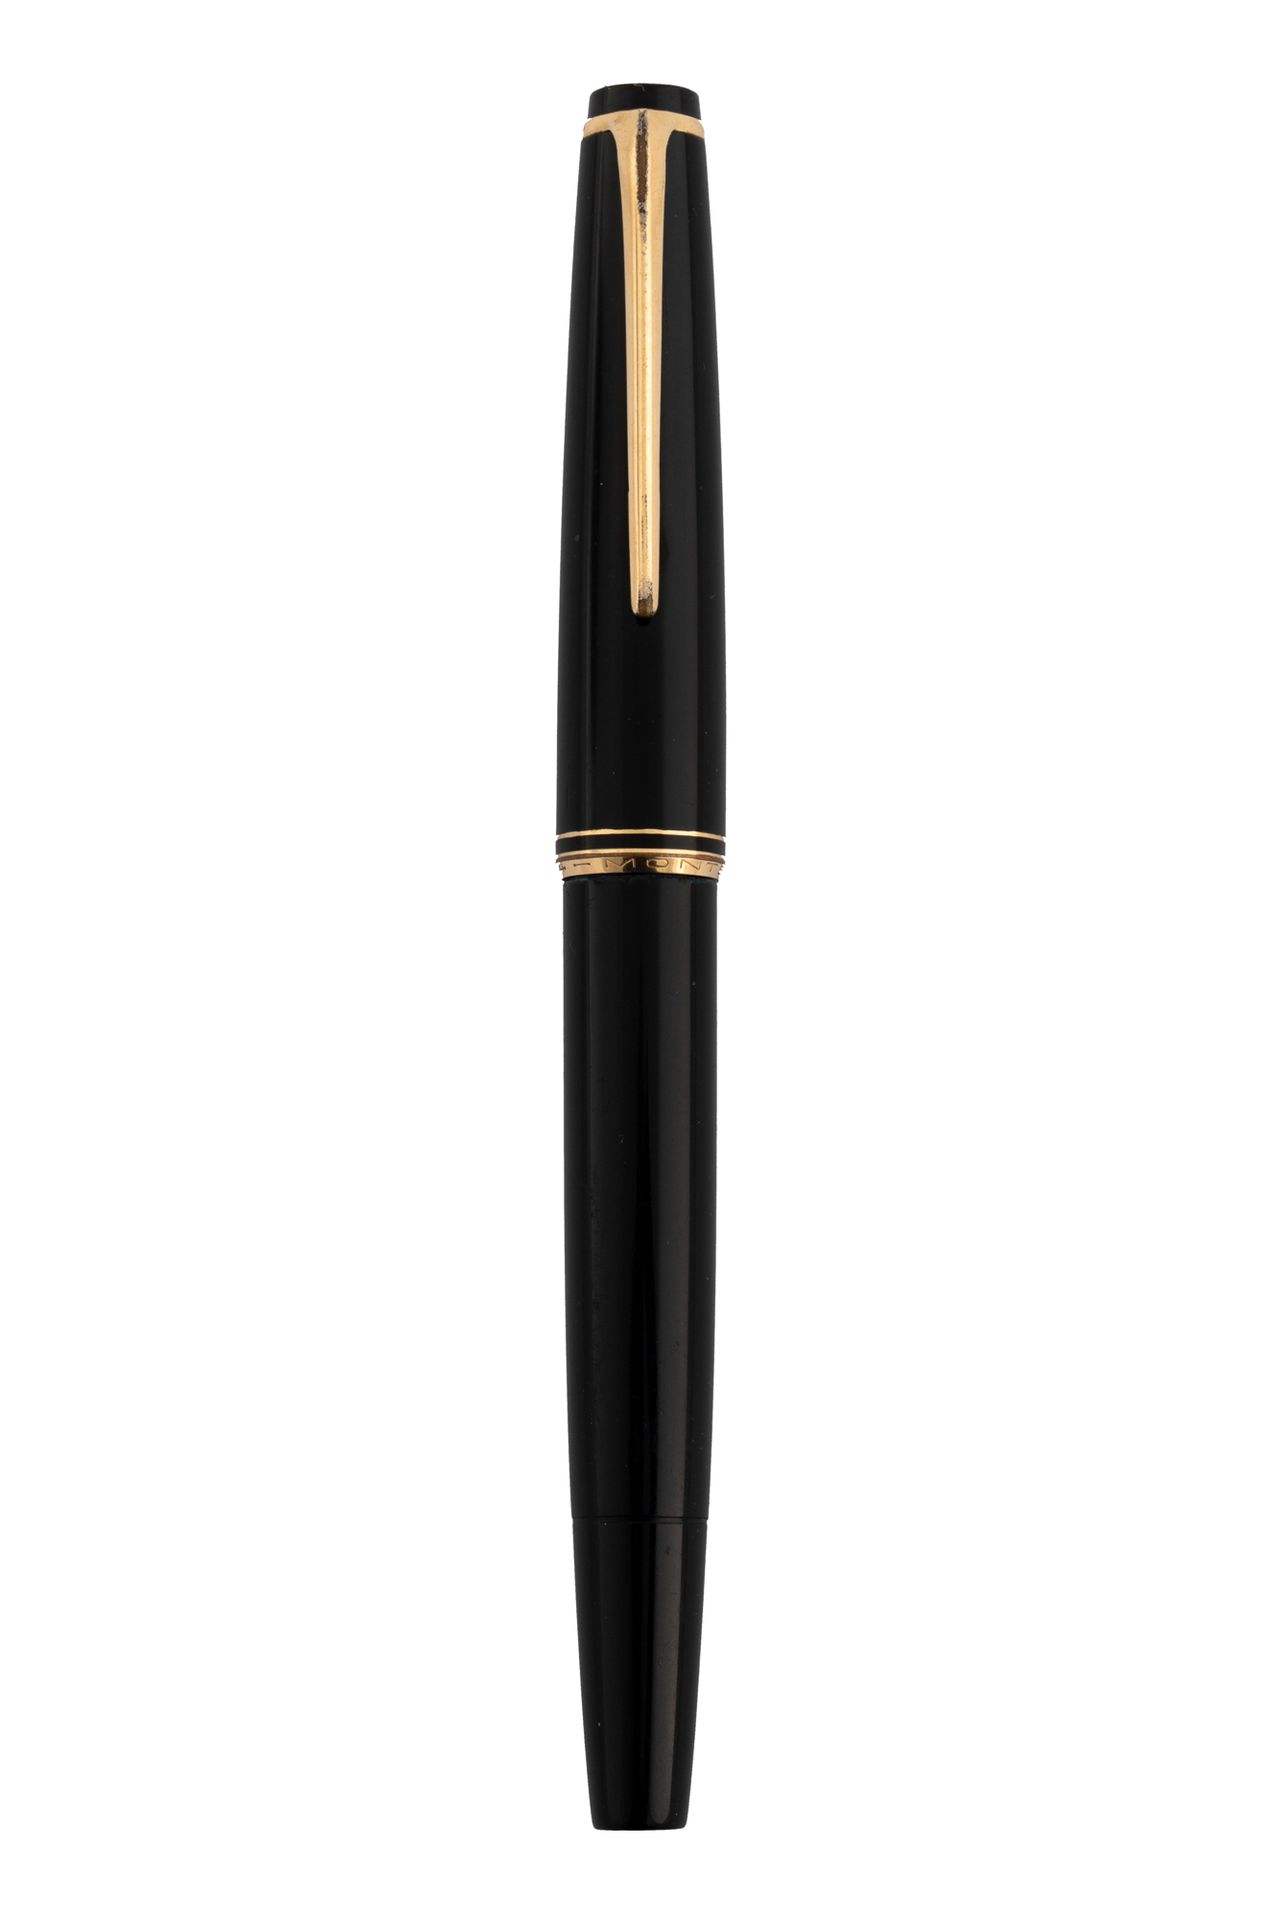 MONTBLANC COLLECTION Stilografica in resina, caricamento a stantuffo, pennino in&hellip;